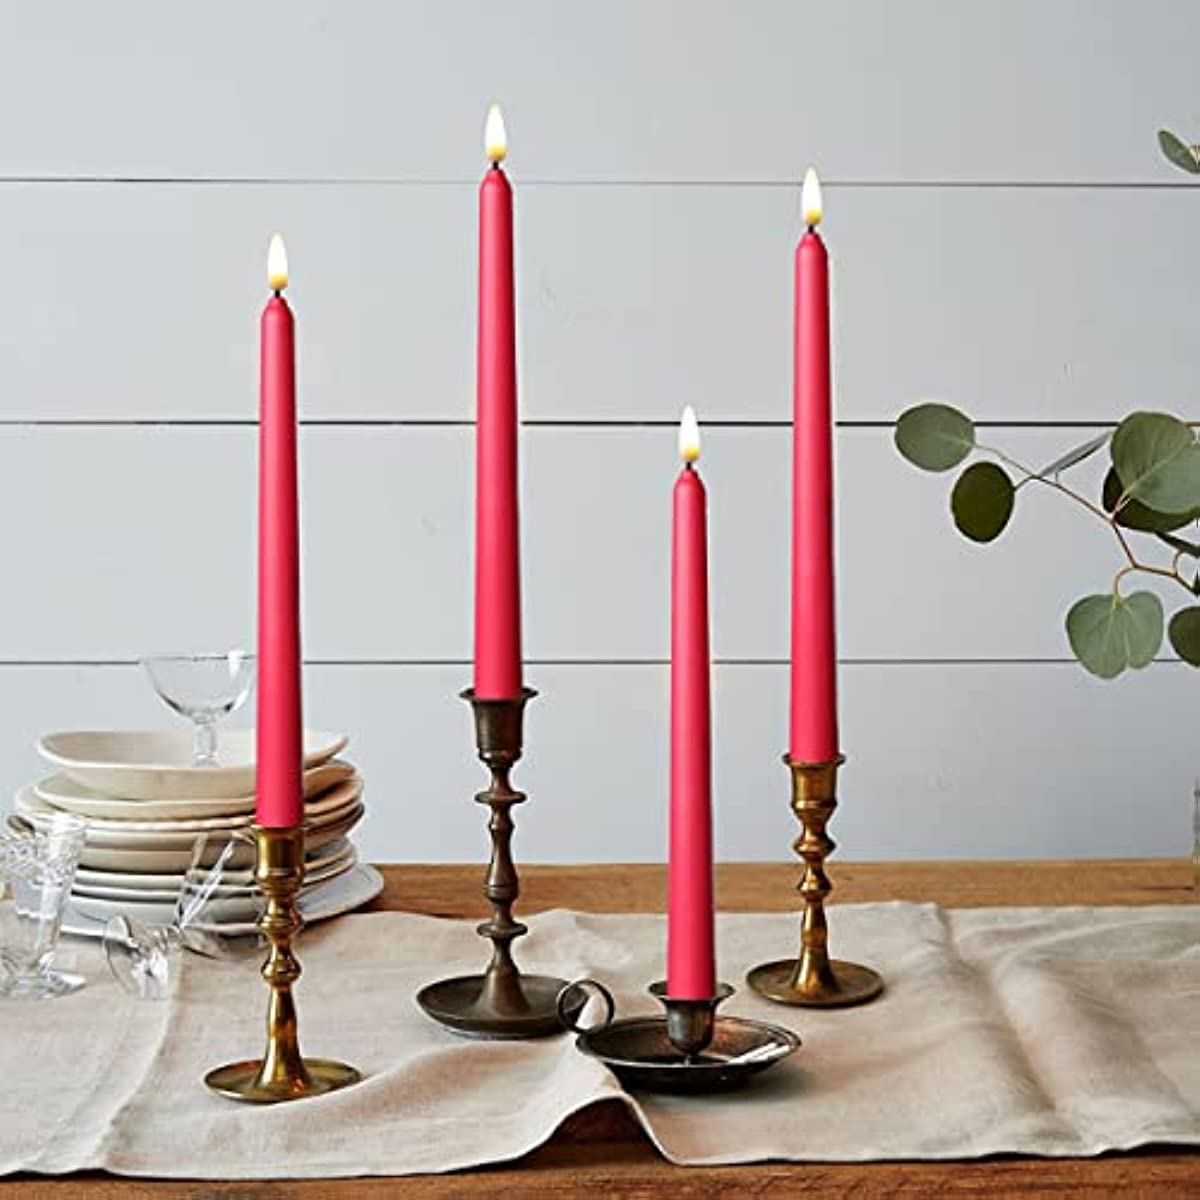 General Wax & Candle  24 FIRESTOP TAPER CANDLES (Self-Extinguishing) -  General Wax & Candle